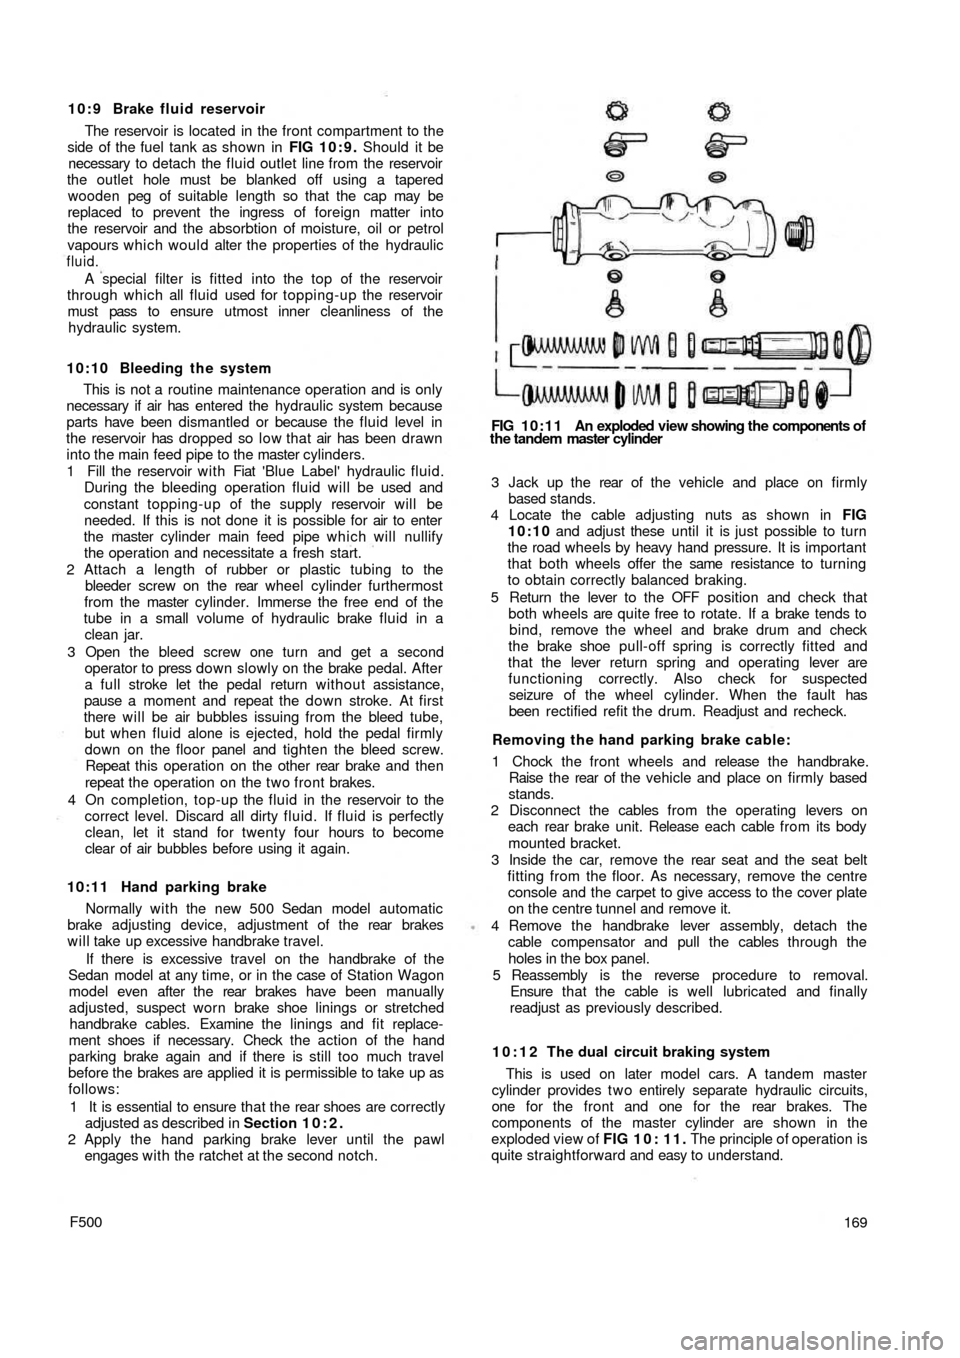 FIAT 500 1959 1.G Workshop Manual 10:9 Brake fluid reservoir
The reservoir is located in the front compartment to the
side of the fuel tank as shown  in FIG 10:9. Should it be
necessary to detach the fluid outlet line from  the reserv